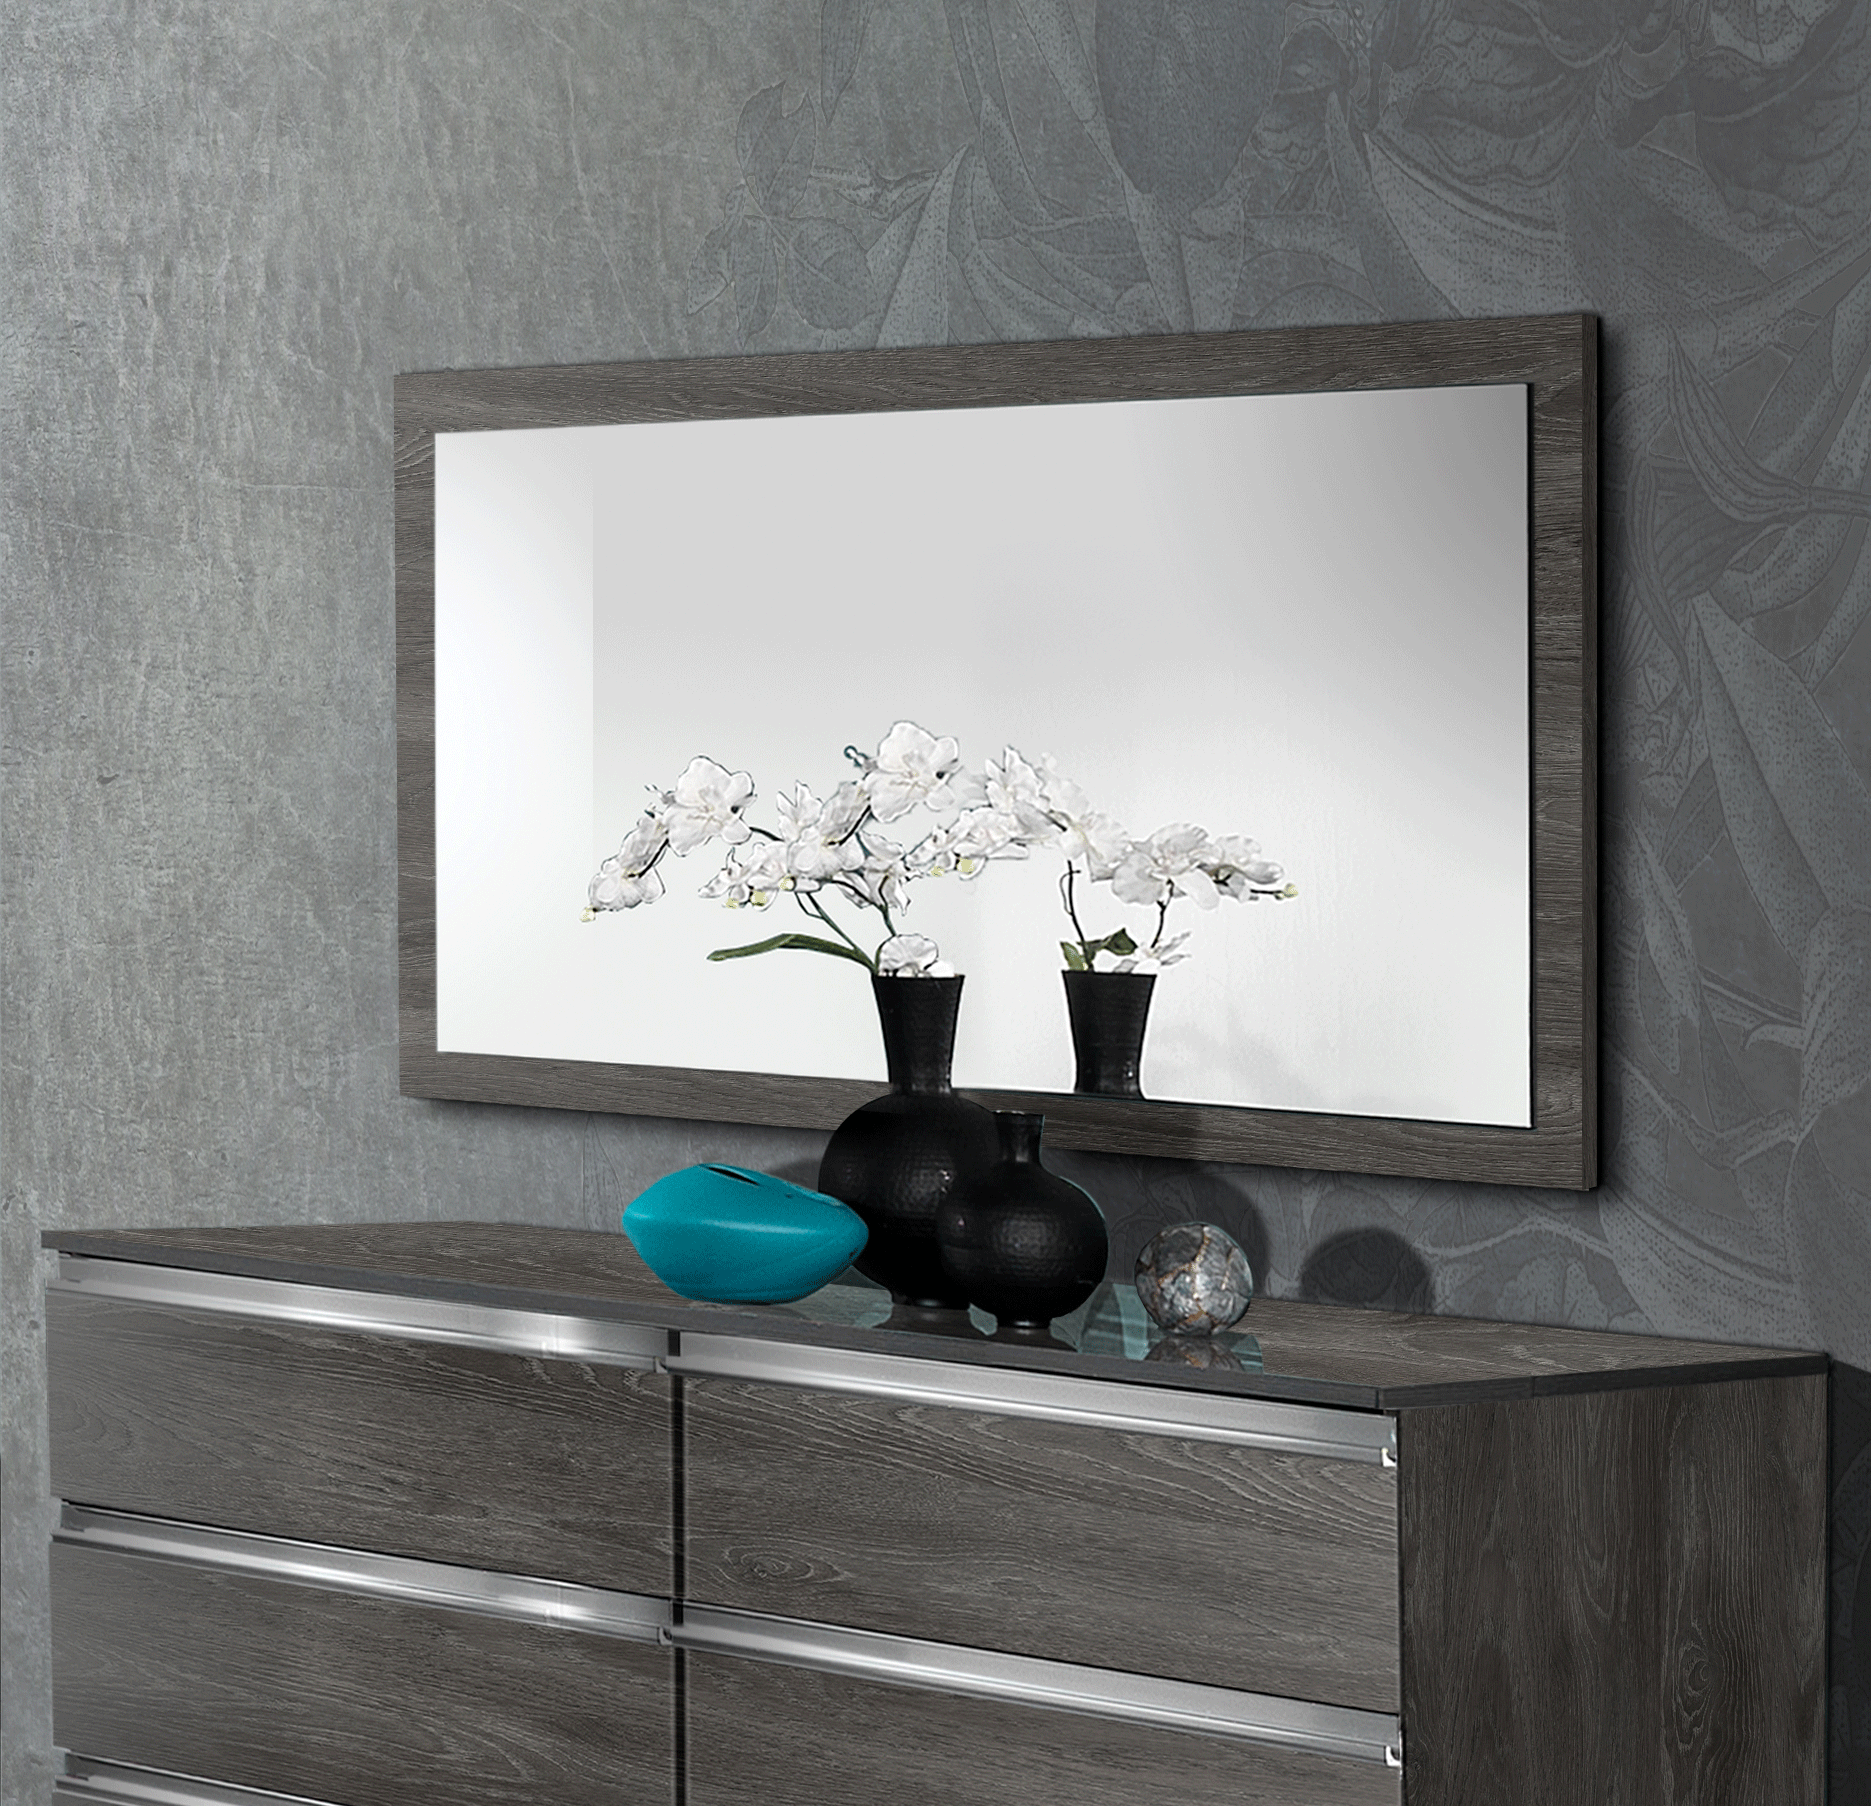 Brands MCS Classic Bedrooms, Italy Oxford mirror for dresser